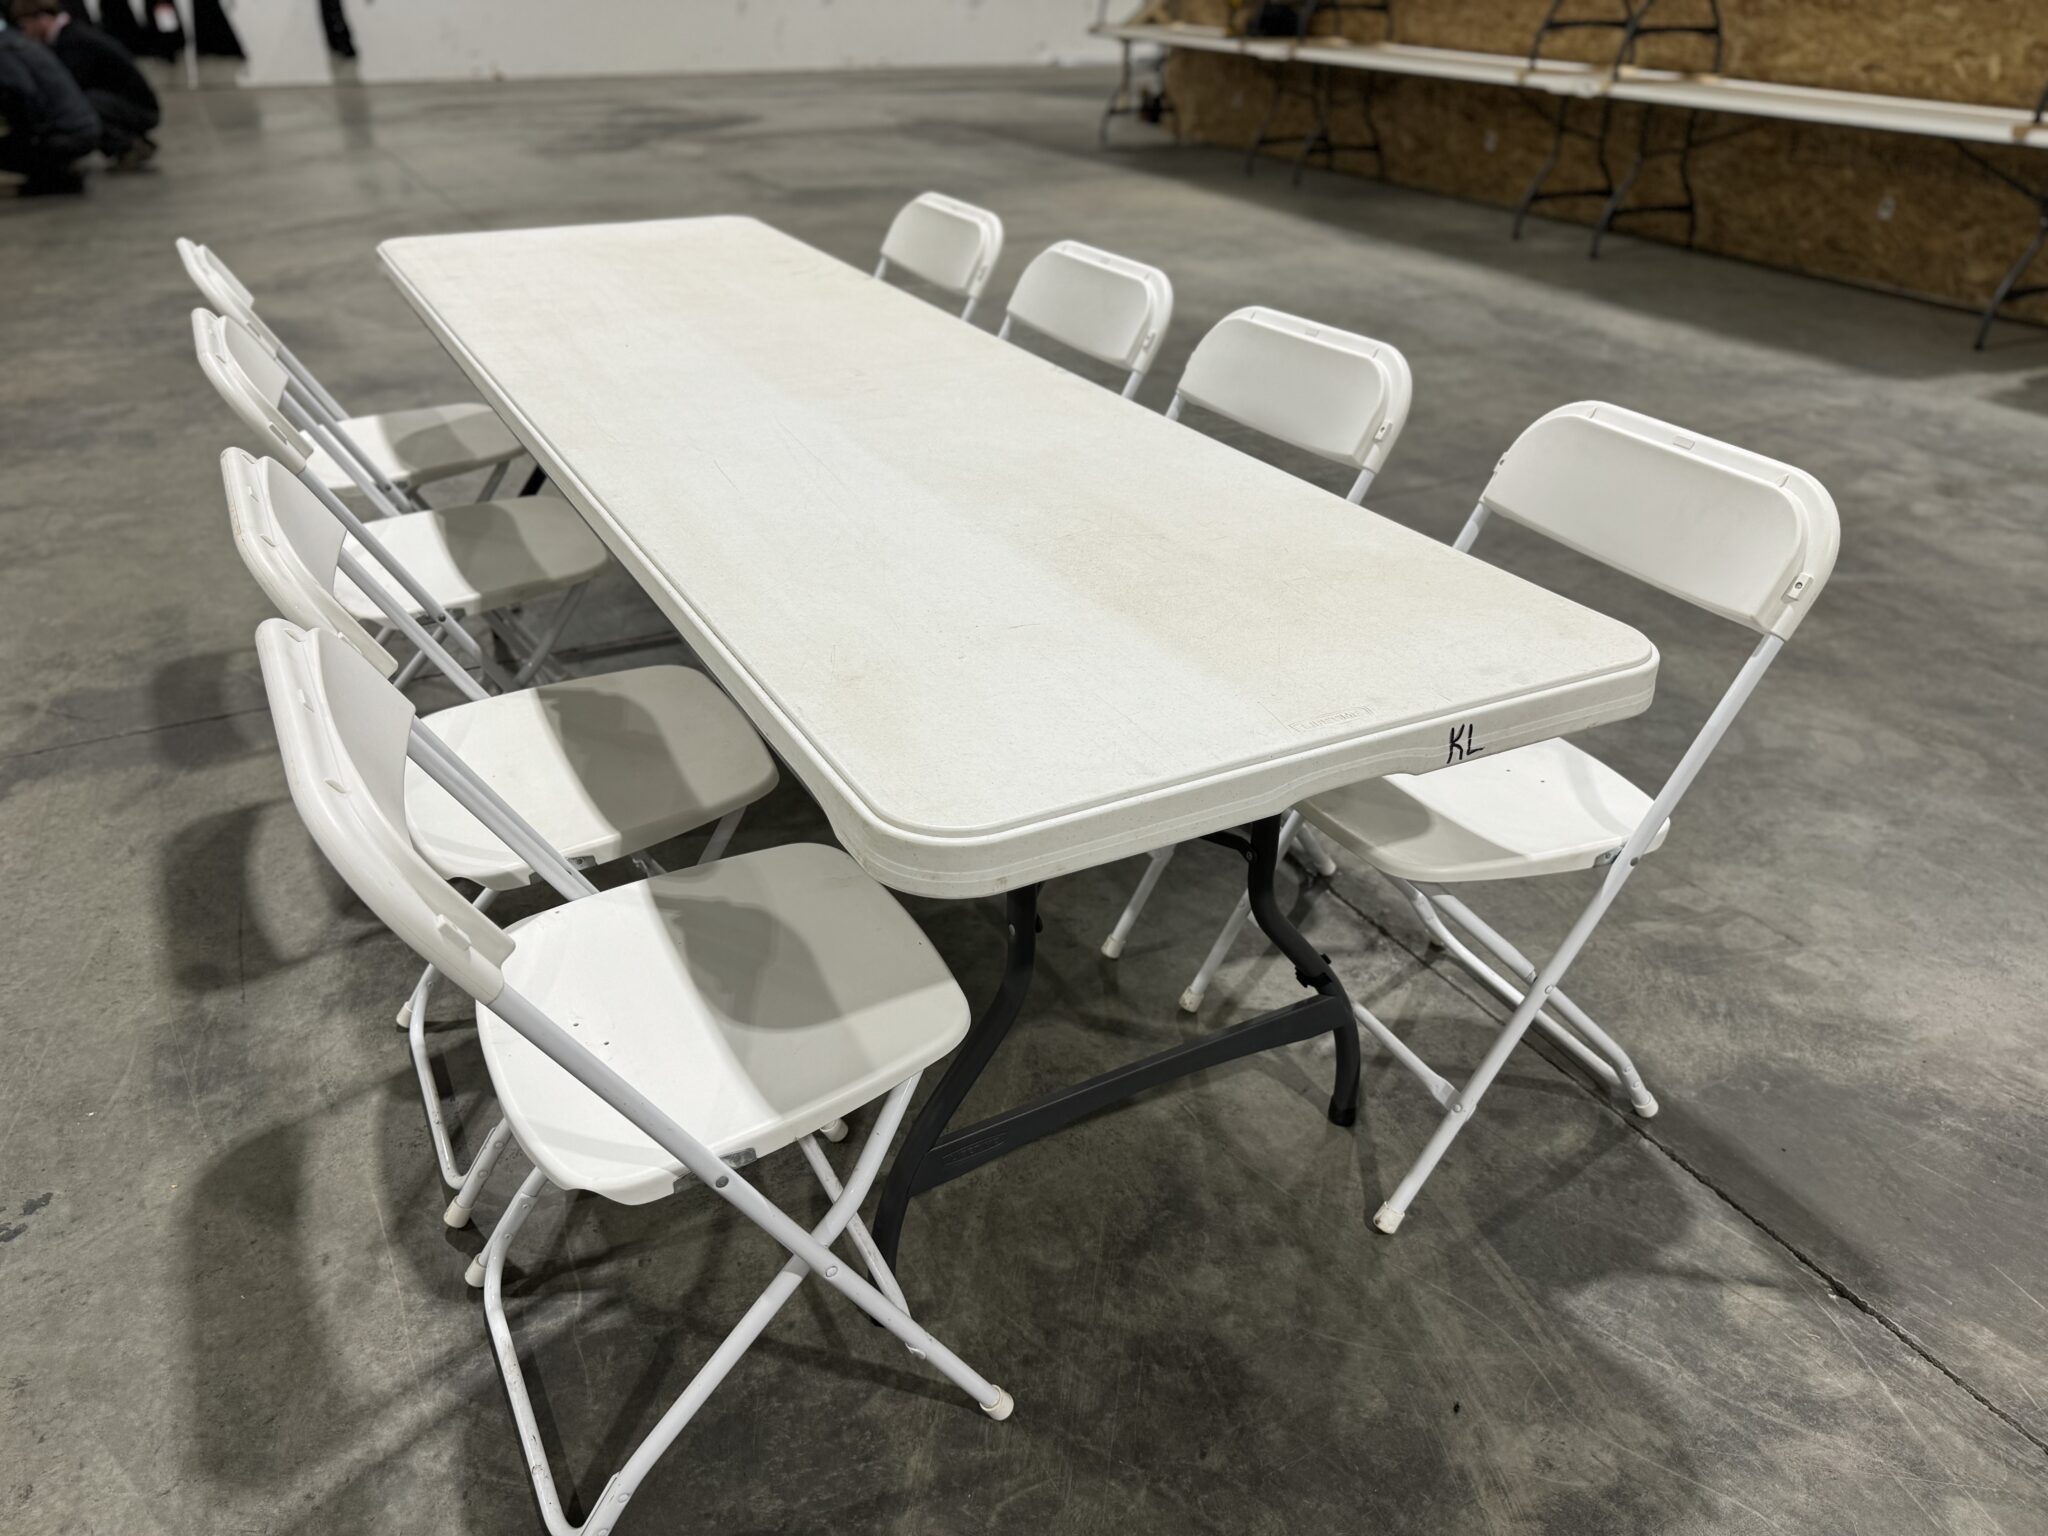 Table and Chair Rental Company Topeka Indiana